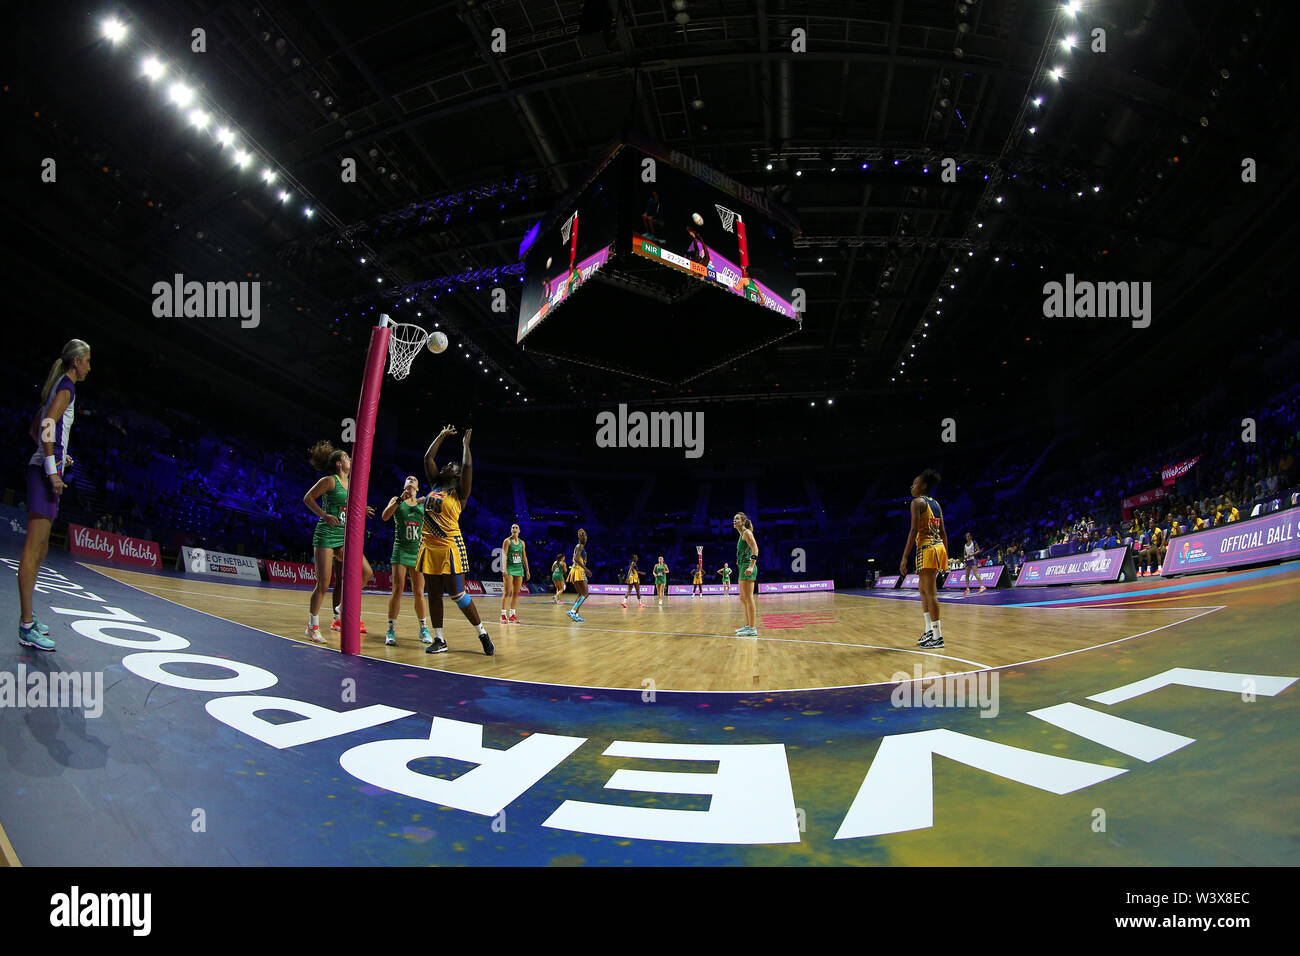 General view of match action between Northern Ireland and Barbados during the netball World Cup match at the M&S Bank Arena, Liverpool. Stock Photo